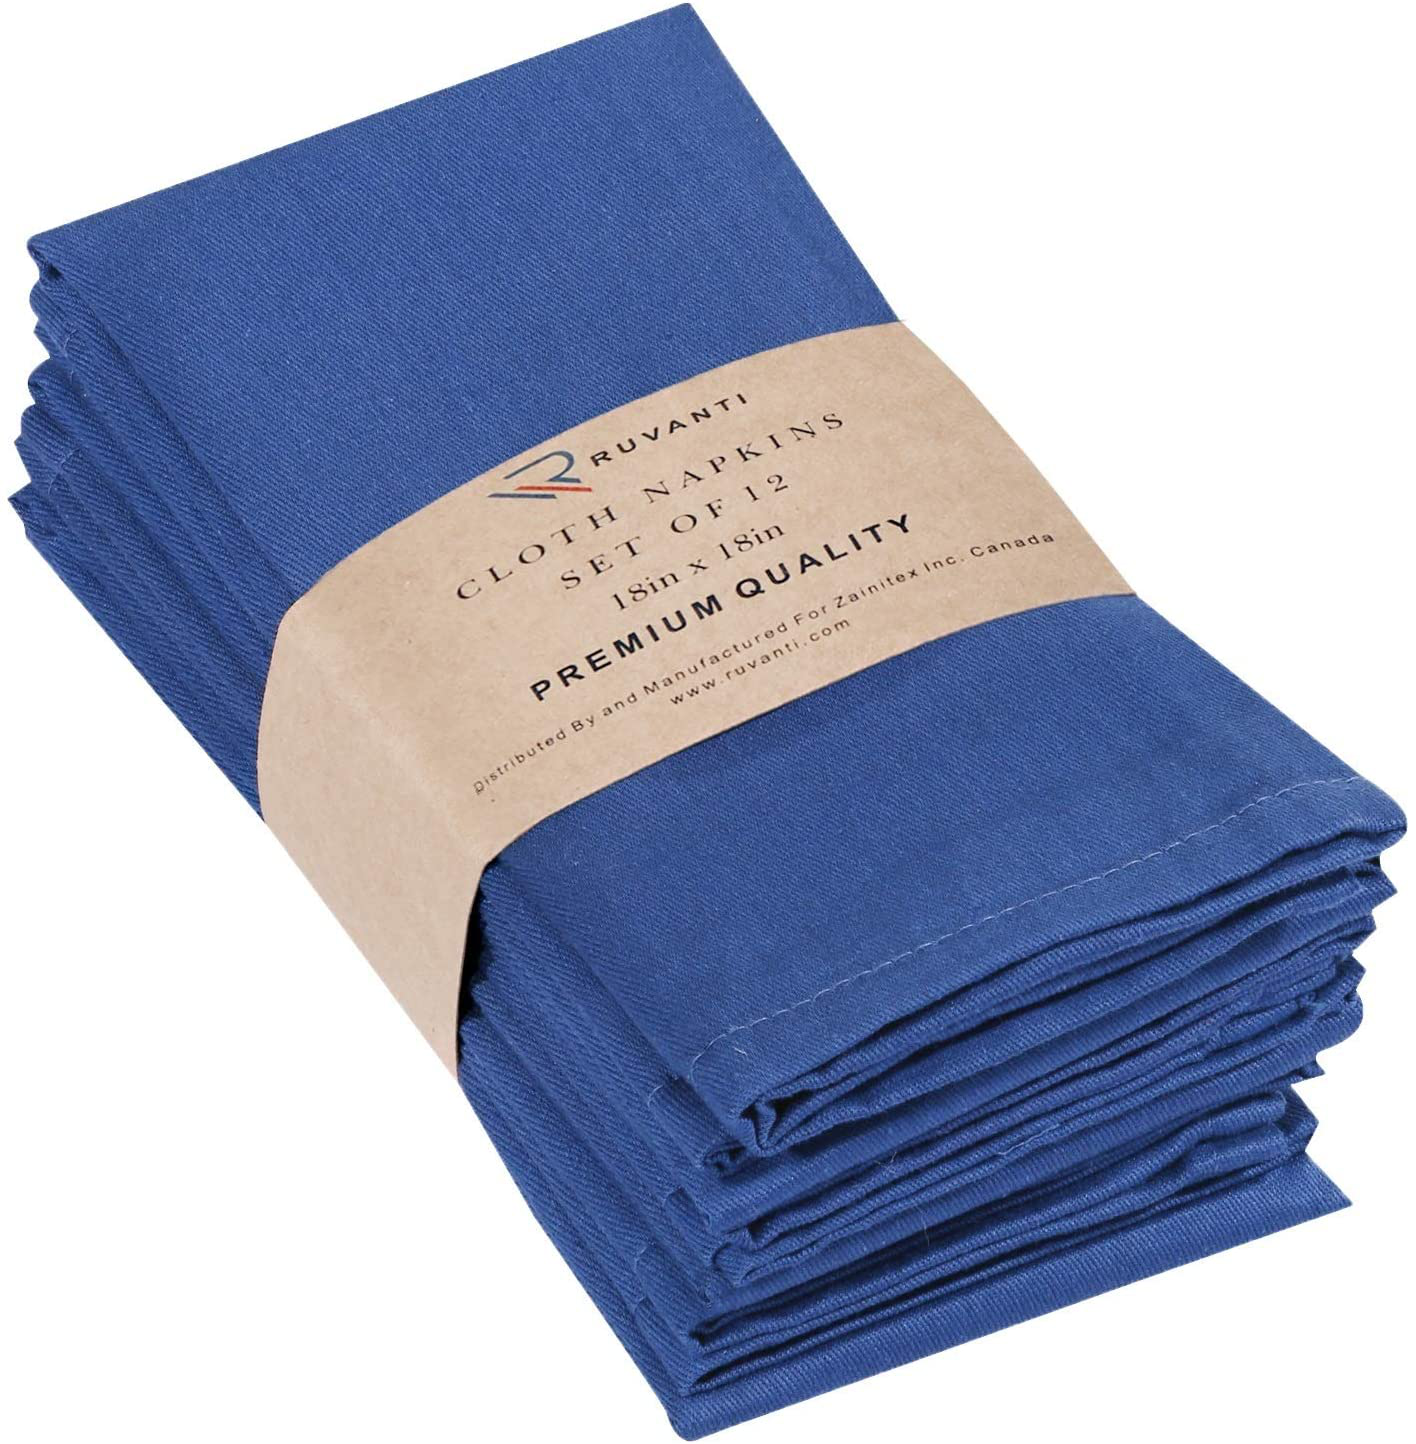 Ruvanti Kitchen Cloth Napkins 12 Pack 18X18 Inch Dinner Napkins Soft & Comfortable Reusable Napkins -Durable Linen Napkins -Perfect Table Napkins / Navy Blue Napkins for Holiday Parties,Weddings &More